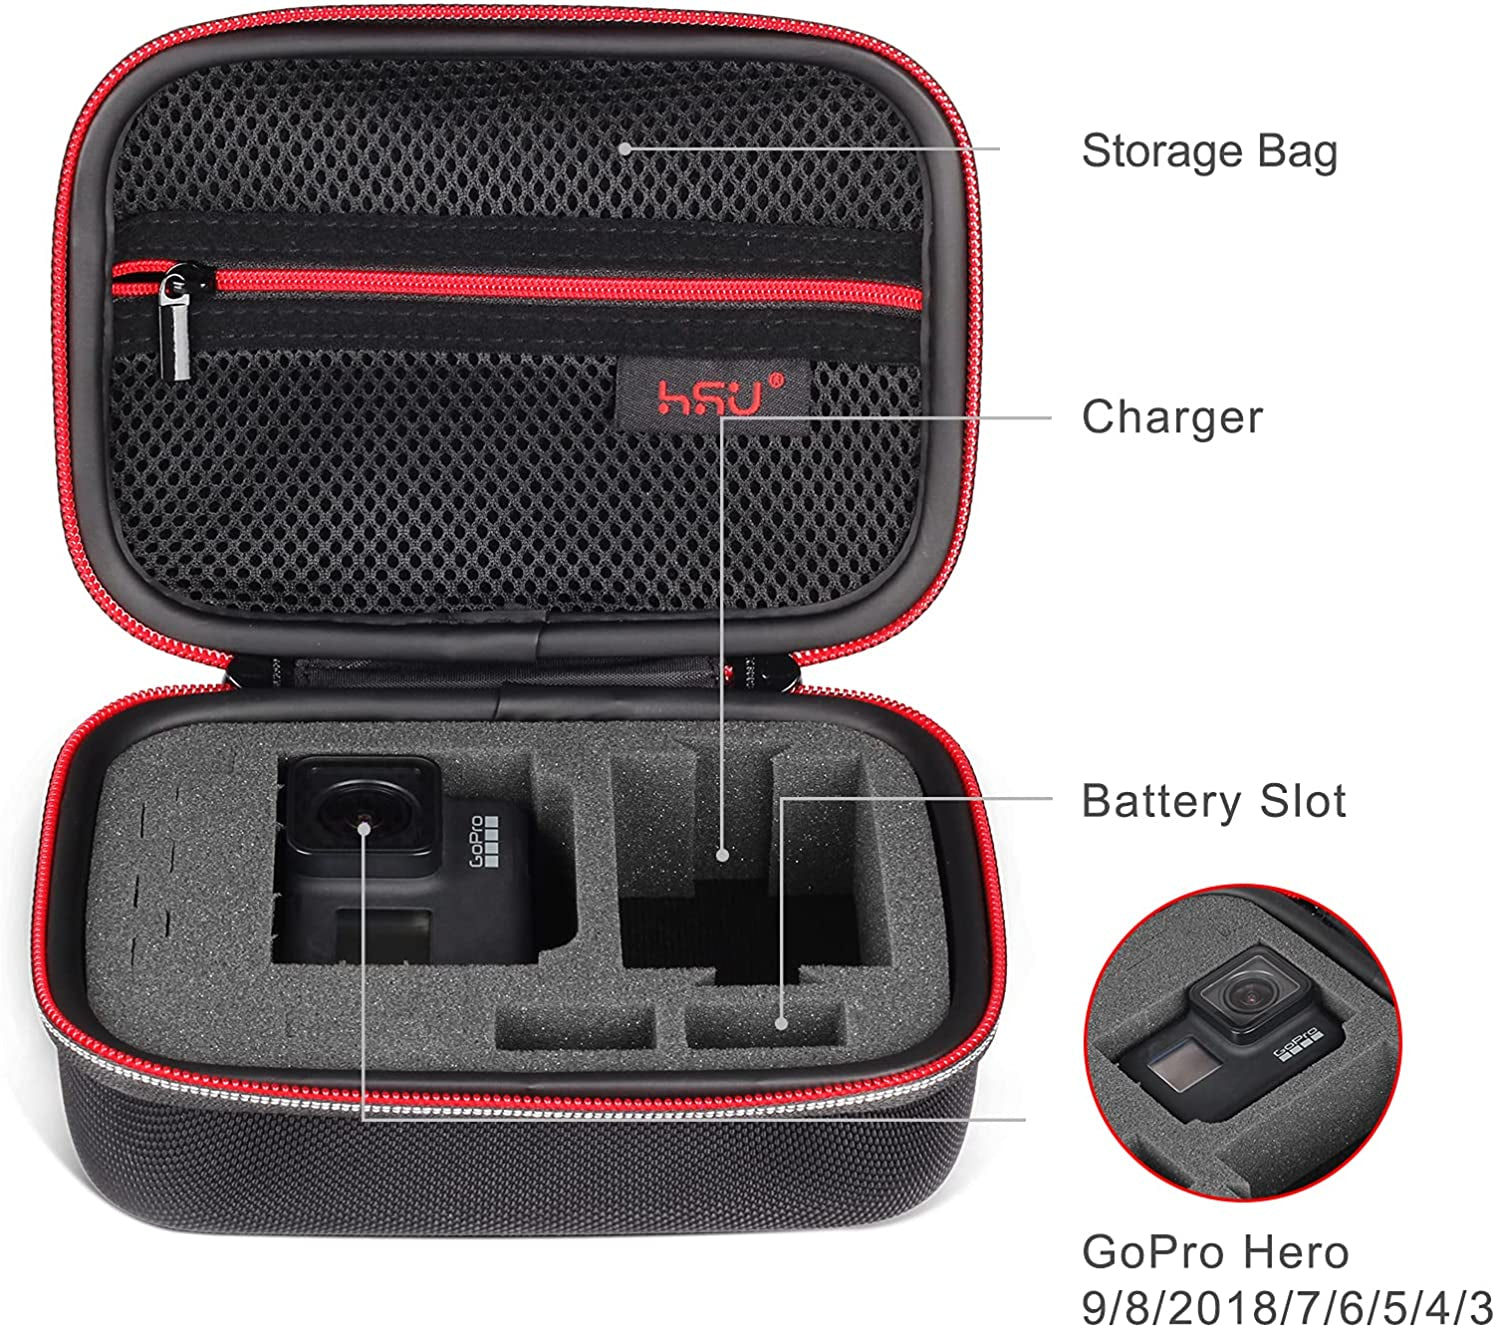 Small Case for Gopro Hero 11/10/9/8, Hero7 Black,6,5, 4, 3+, 3,Hero(2018)  Carrying Case for Action Cameras and Gopro Accessories(Small Size Red)